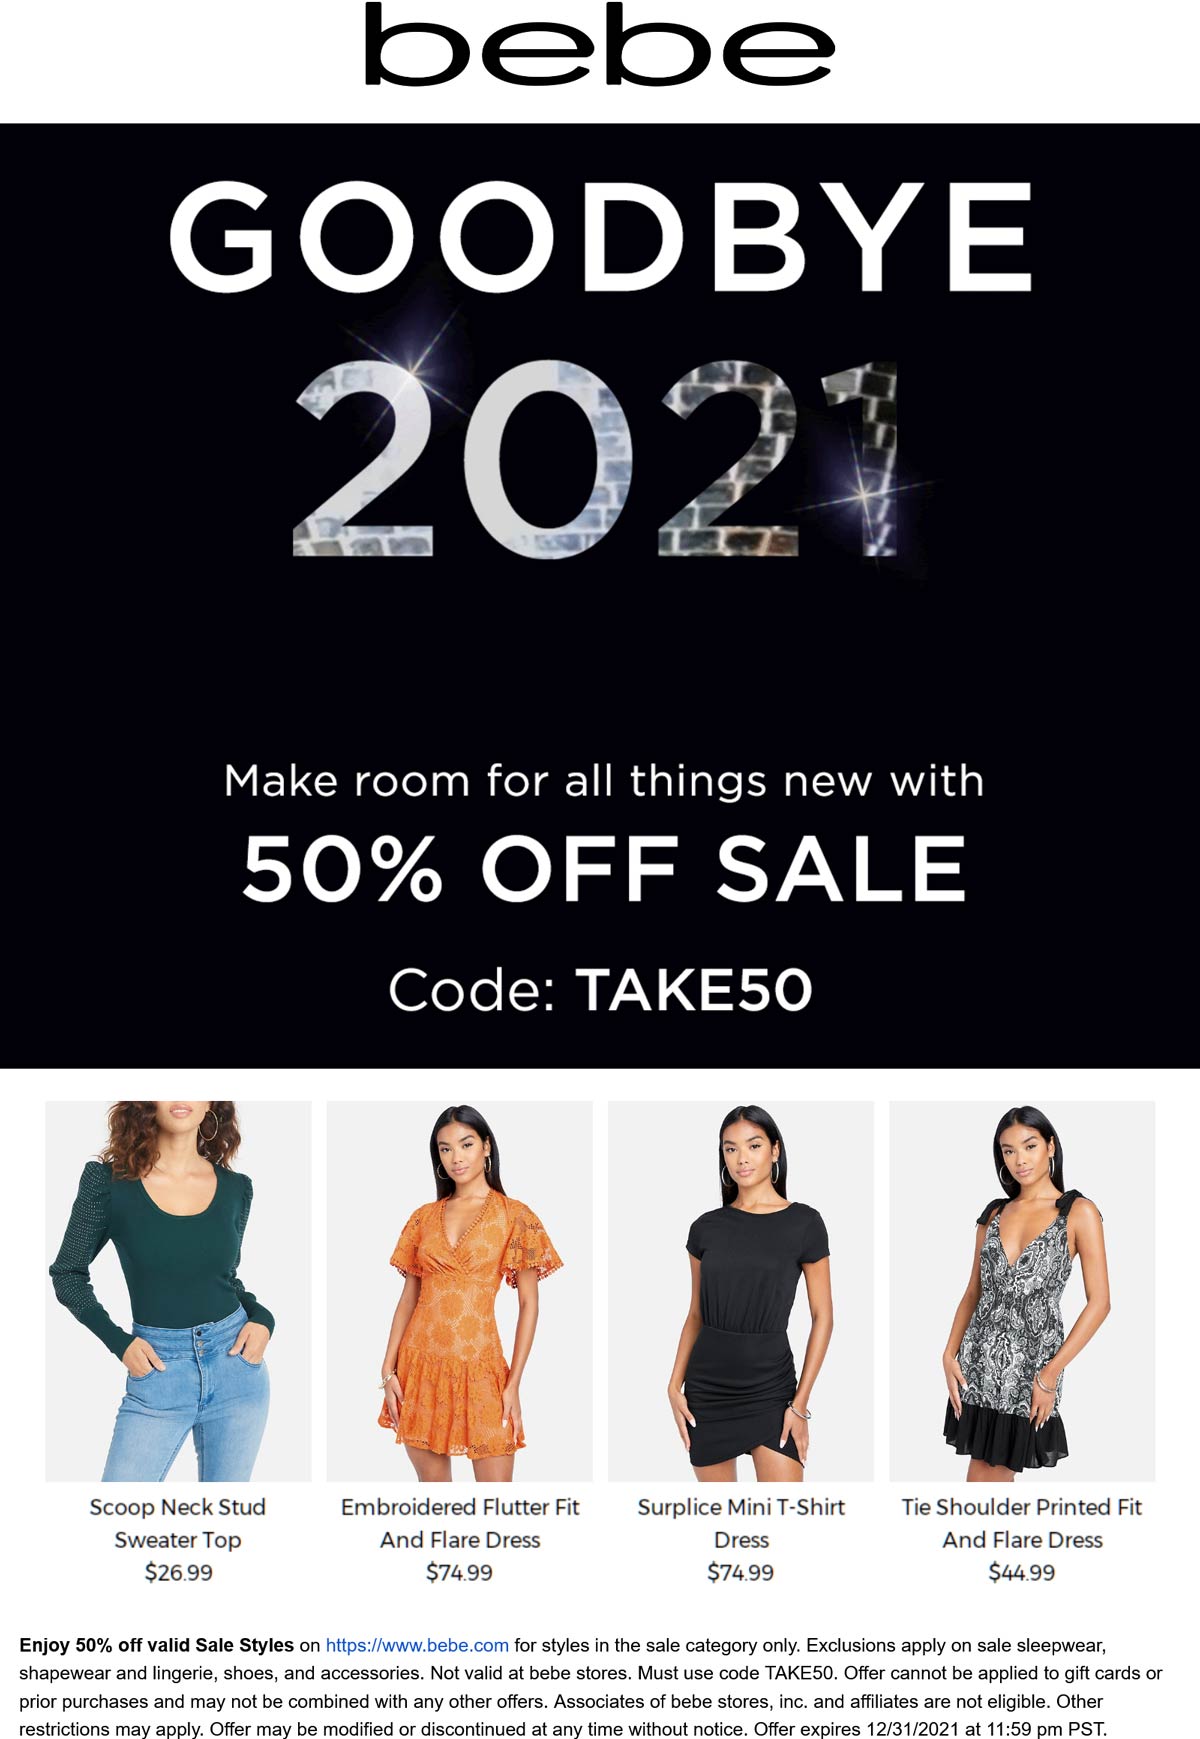 bebe stores Coupon  50% off sale styles today online at bebe via promo code TAKE50 #bebe 